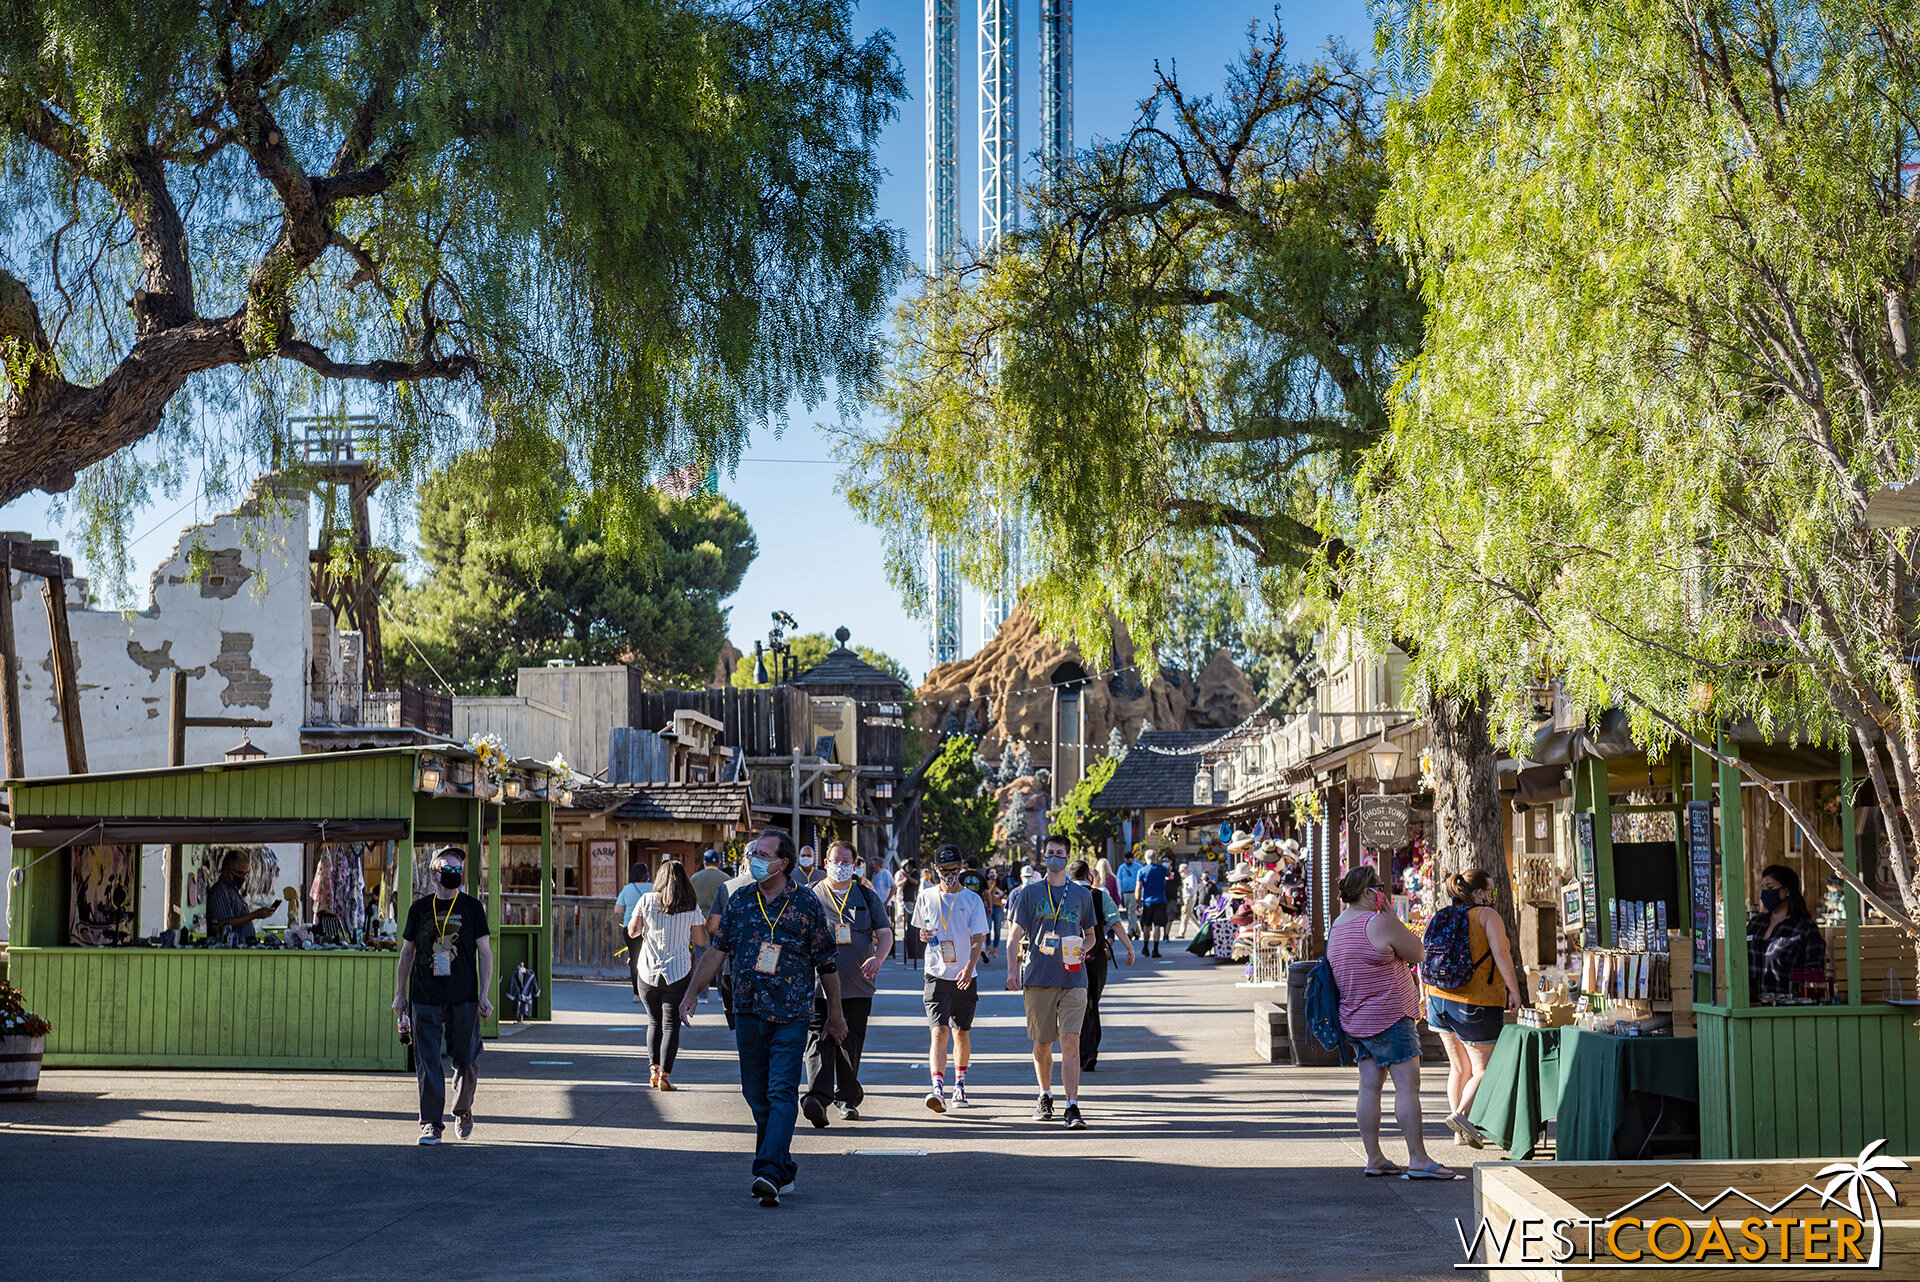  This is similar to what guests see during the park’s season events like the Boysenberry Festival and Knott’s Merry Farm’s Christmas Craft Village. 